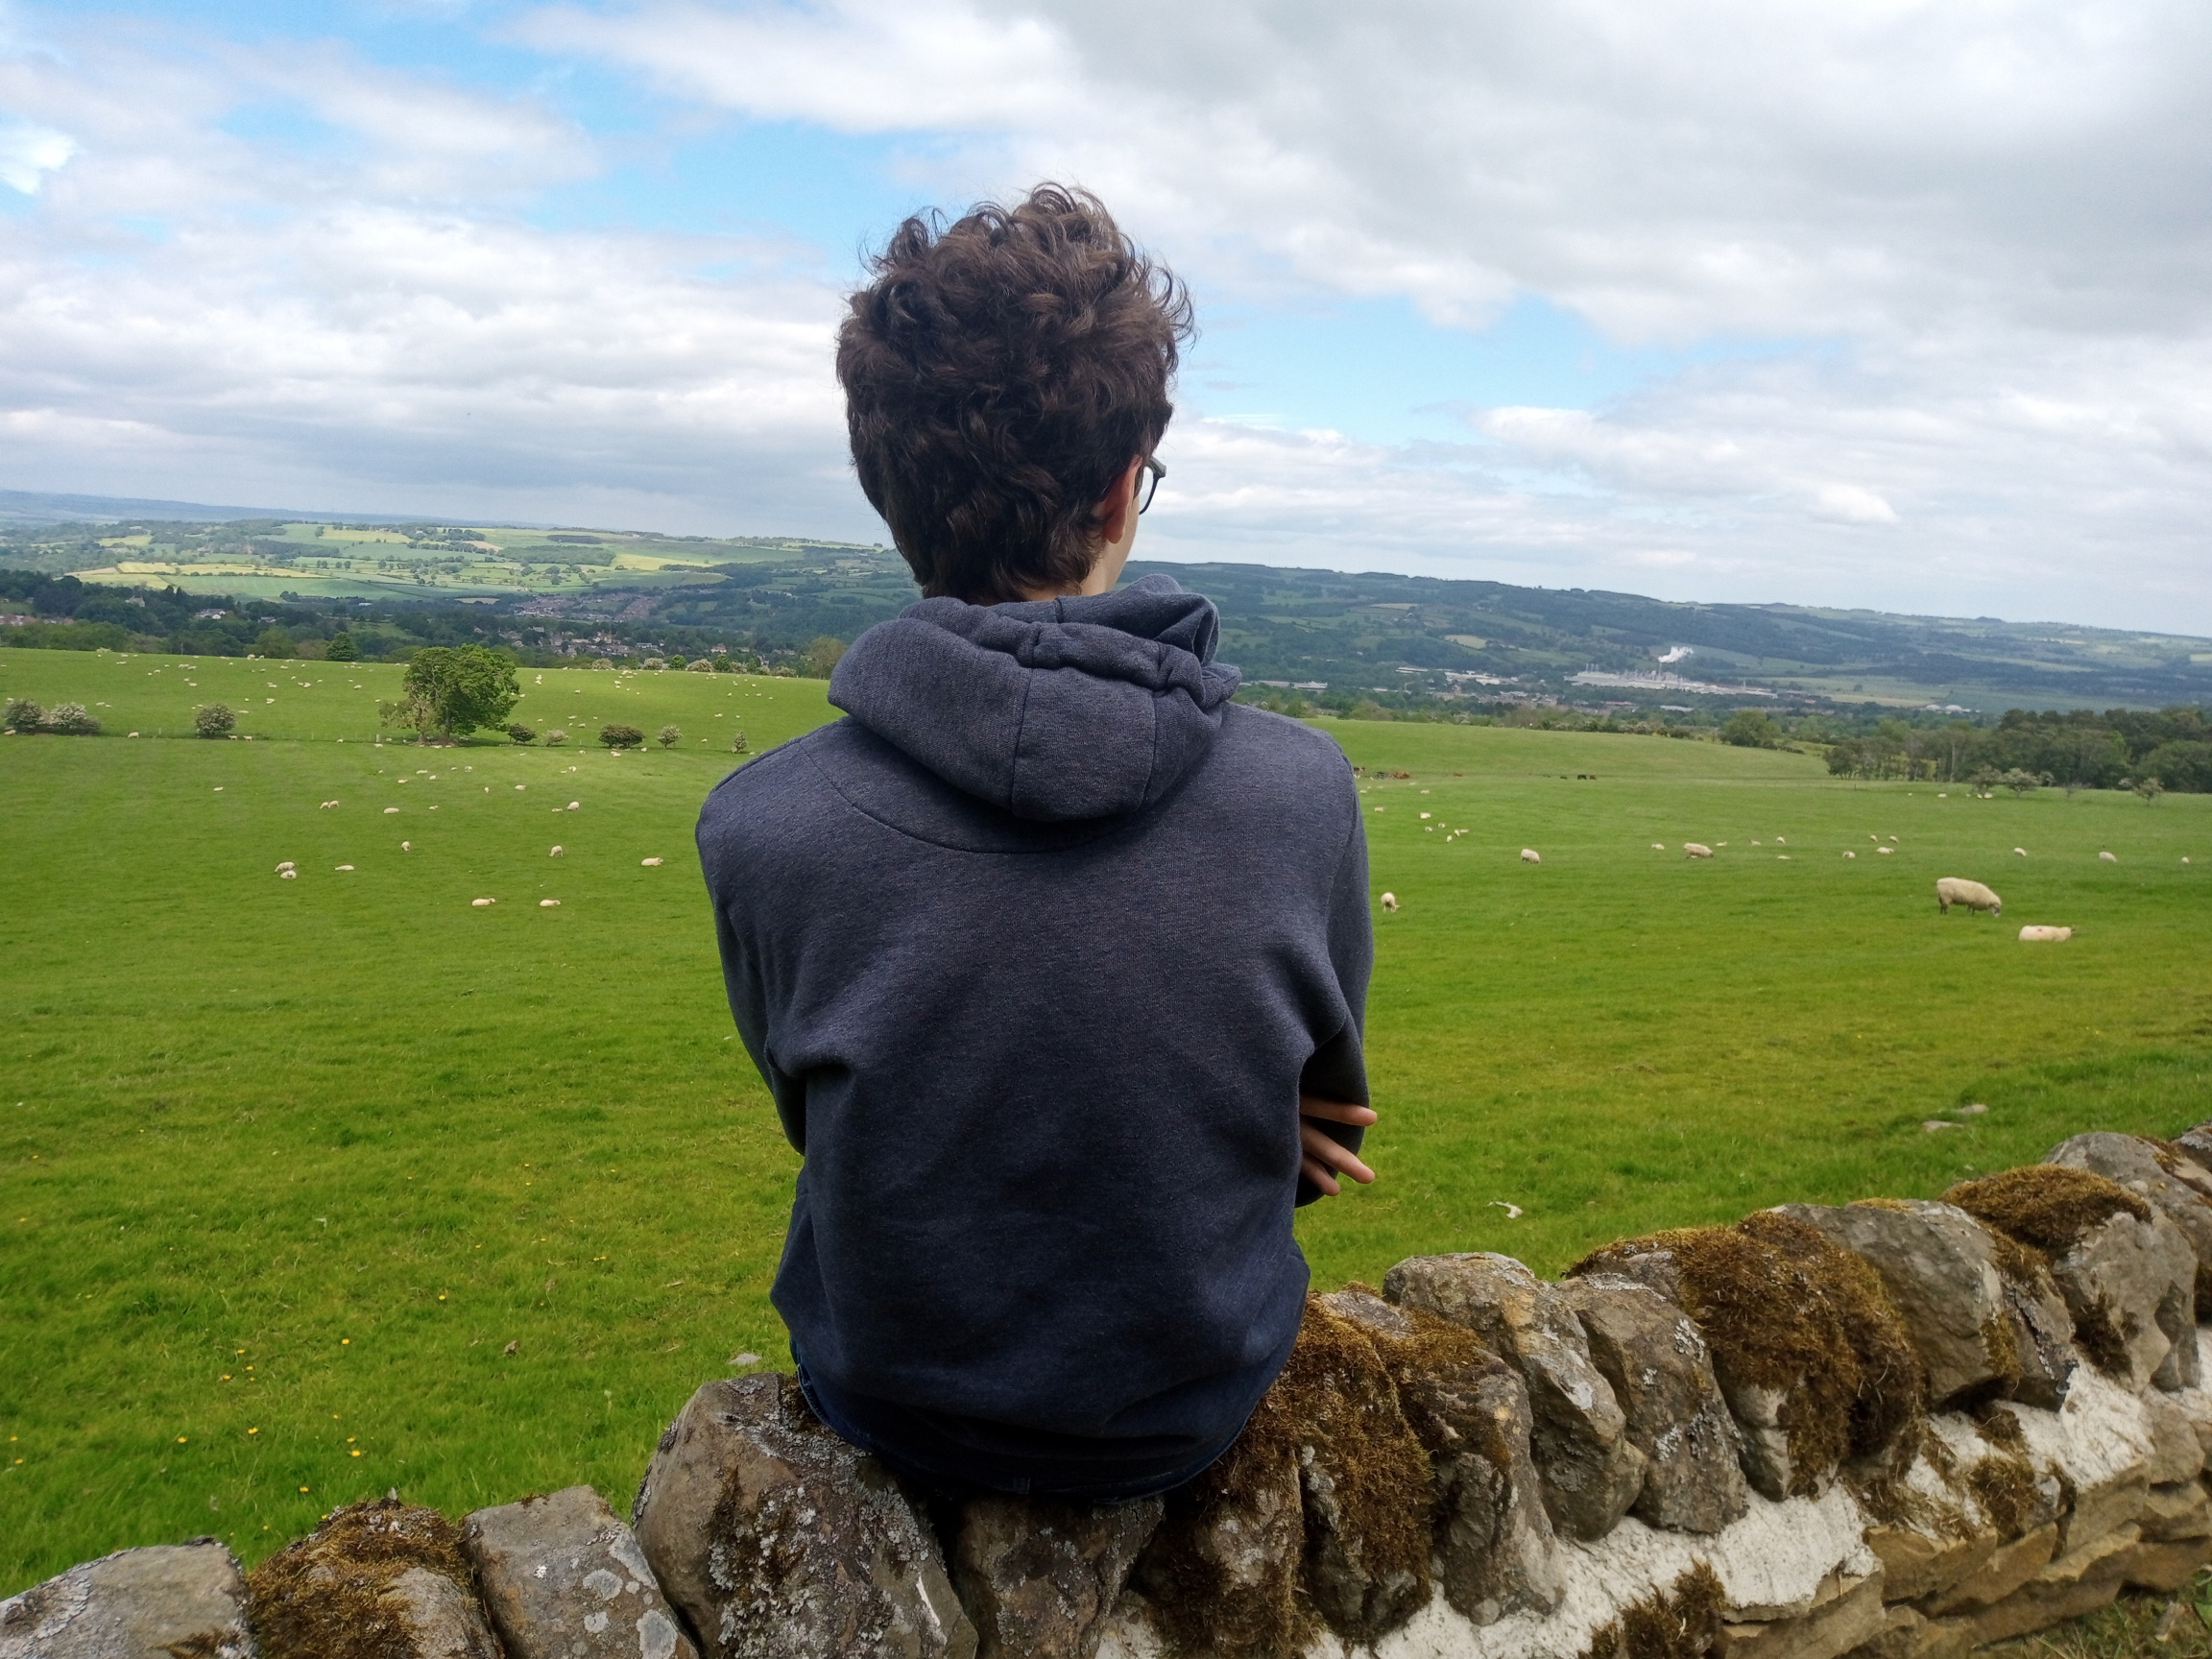 Oliver sat facing towards a town in the distance.